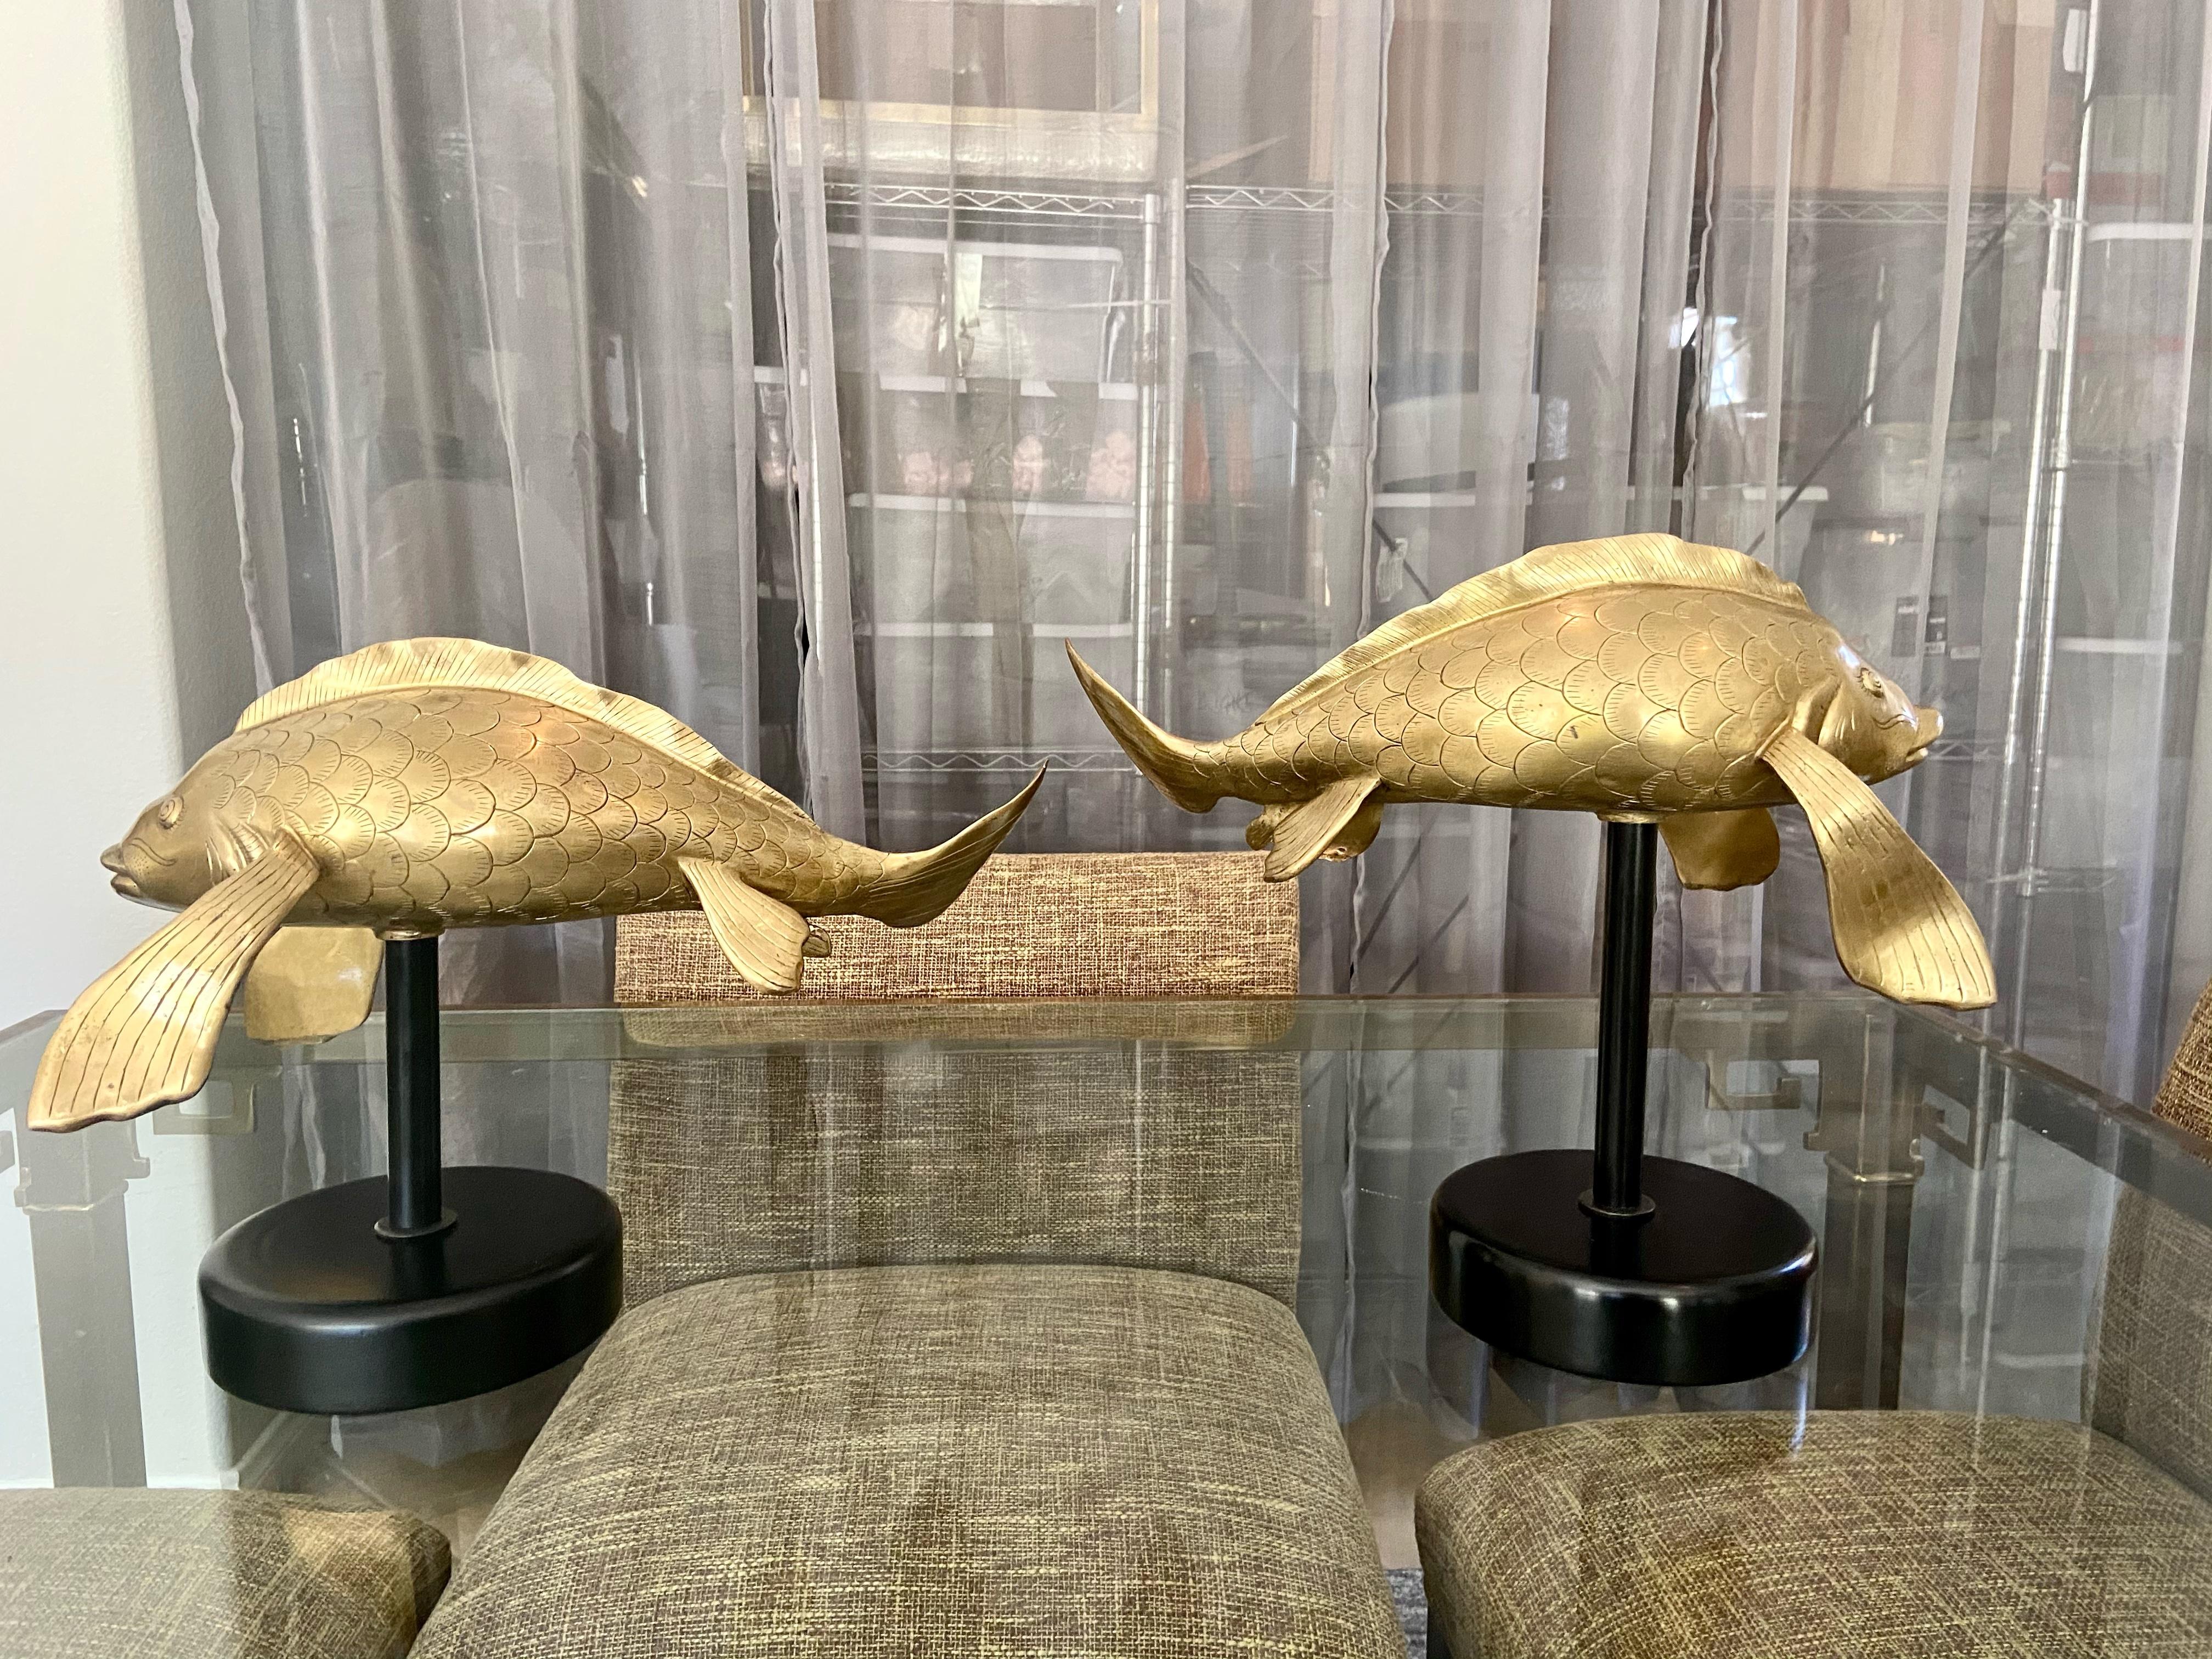 Pair of Large Brass Koi Fish Figural Sculptures For Sale 6